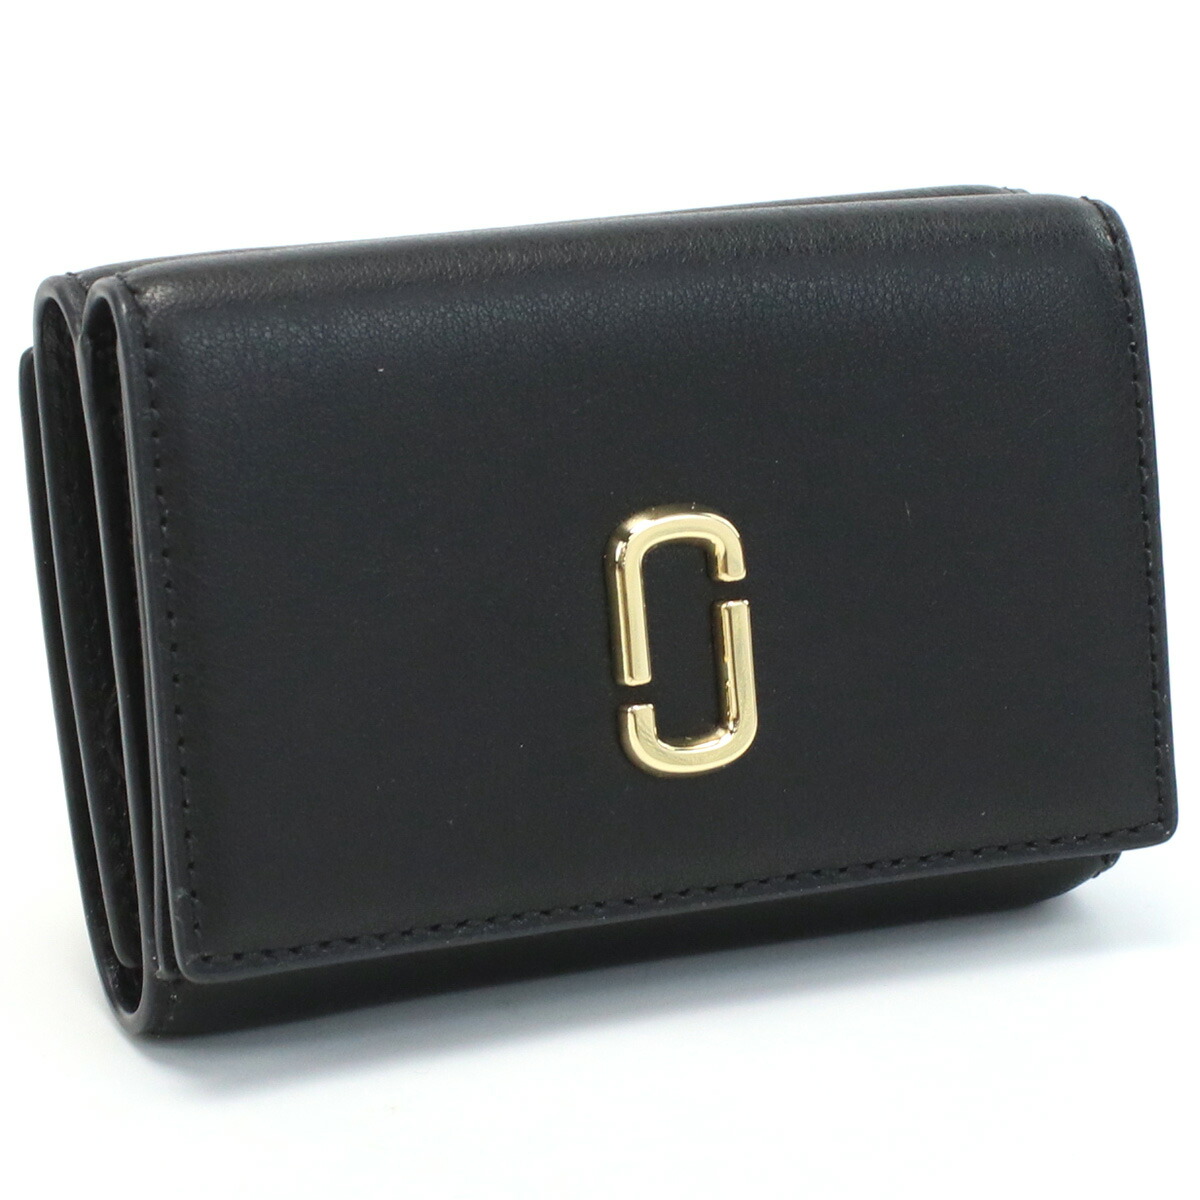 Armerie Boutique マーク・ジェイコブス MARC JACOBS THE TRIFOLD WALLET 三折財布小銭入付き ブランド  2S3SMP005S01 001 BLACK ブラック wallet-01 mini-01